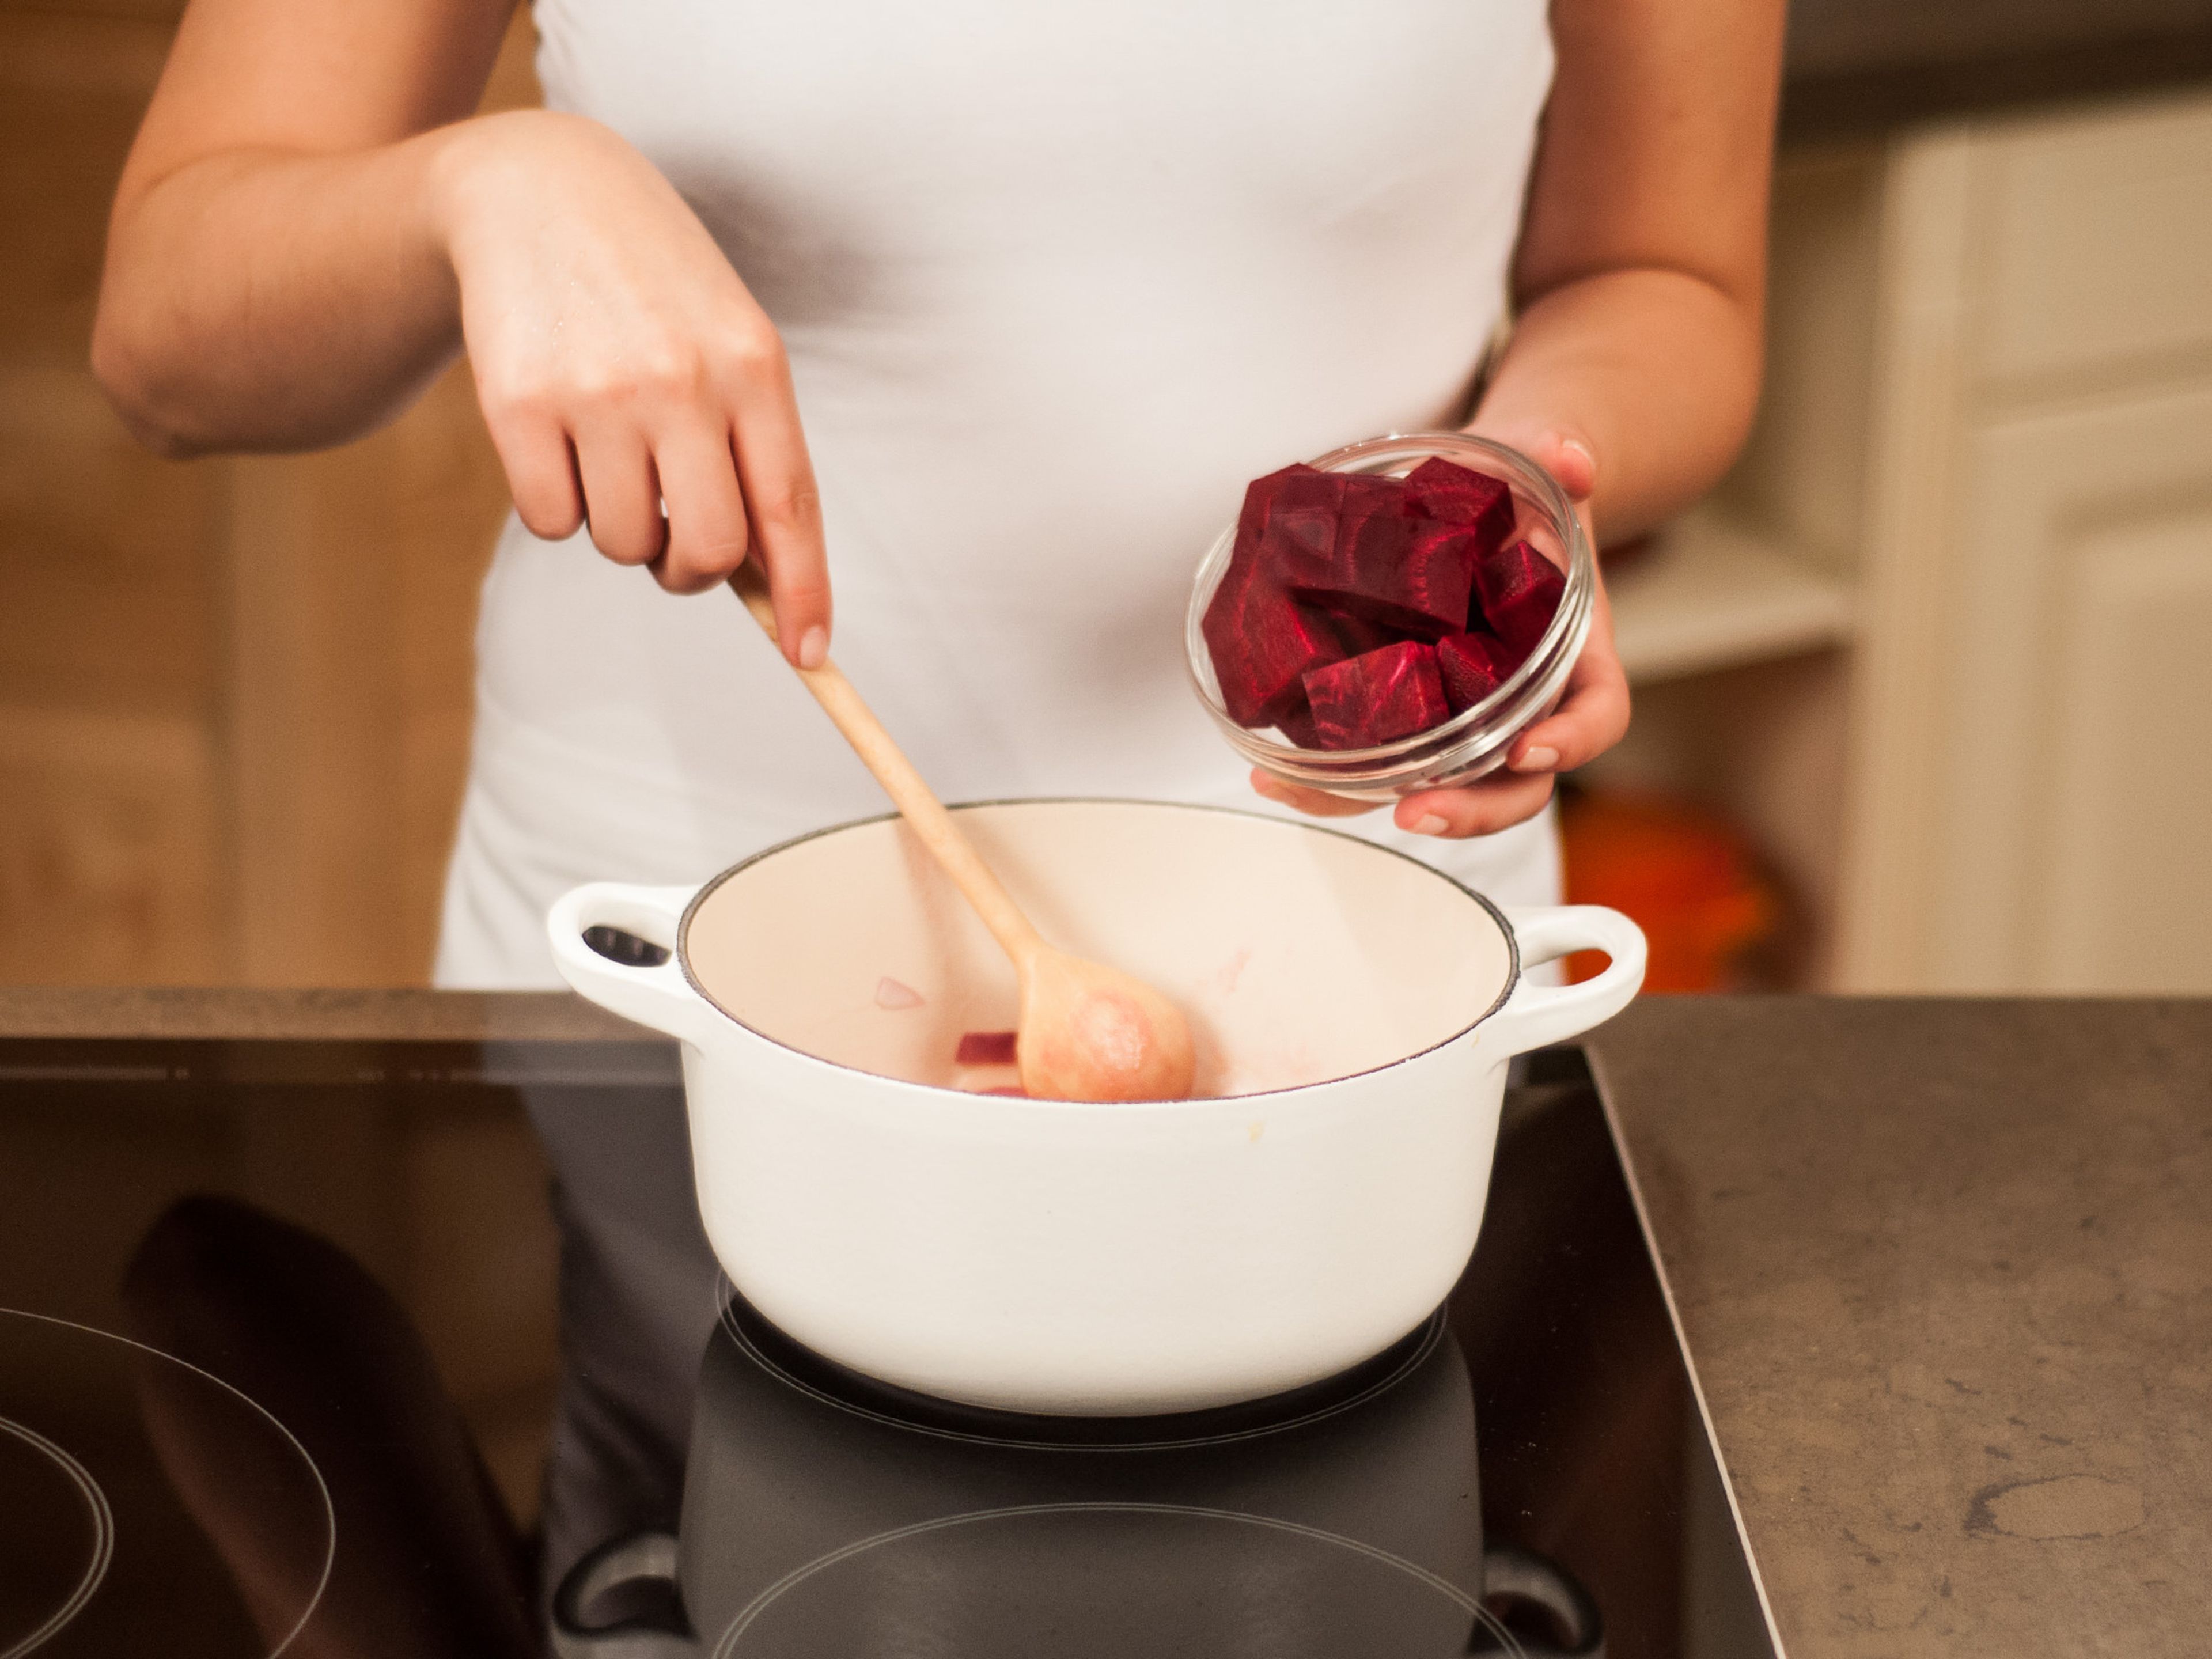 Add butter to a large saucepan. Add onion and garlic and sauté until translucent. Add beet and sauté for approx. 5 – 7 min. Season with salt and pepper.